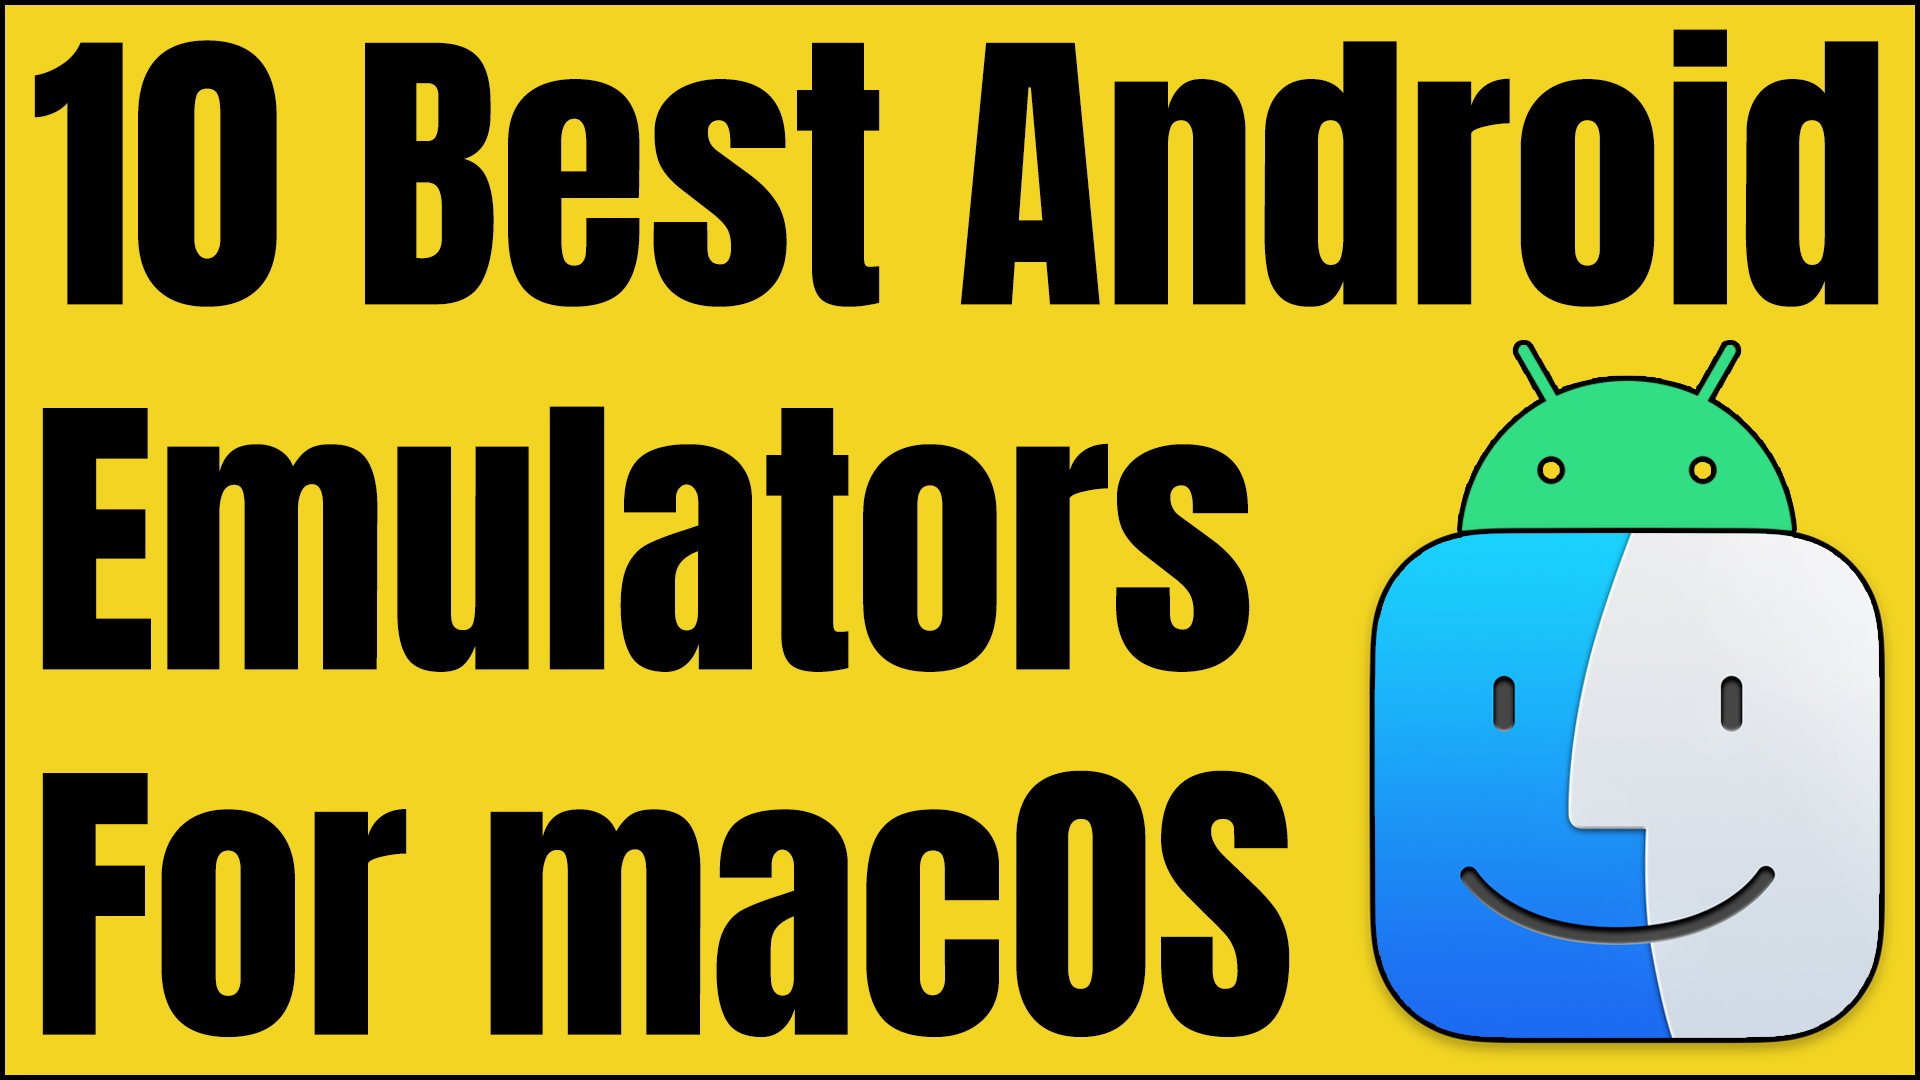 10 Best Android Emulators For macOS